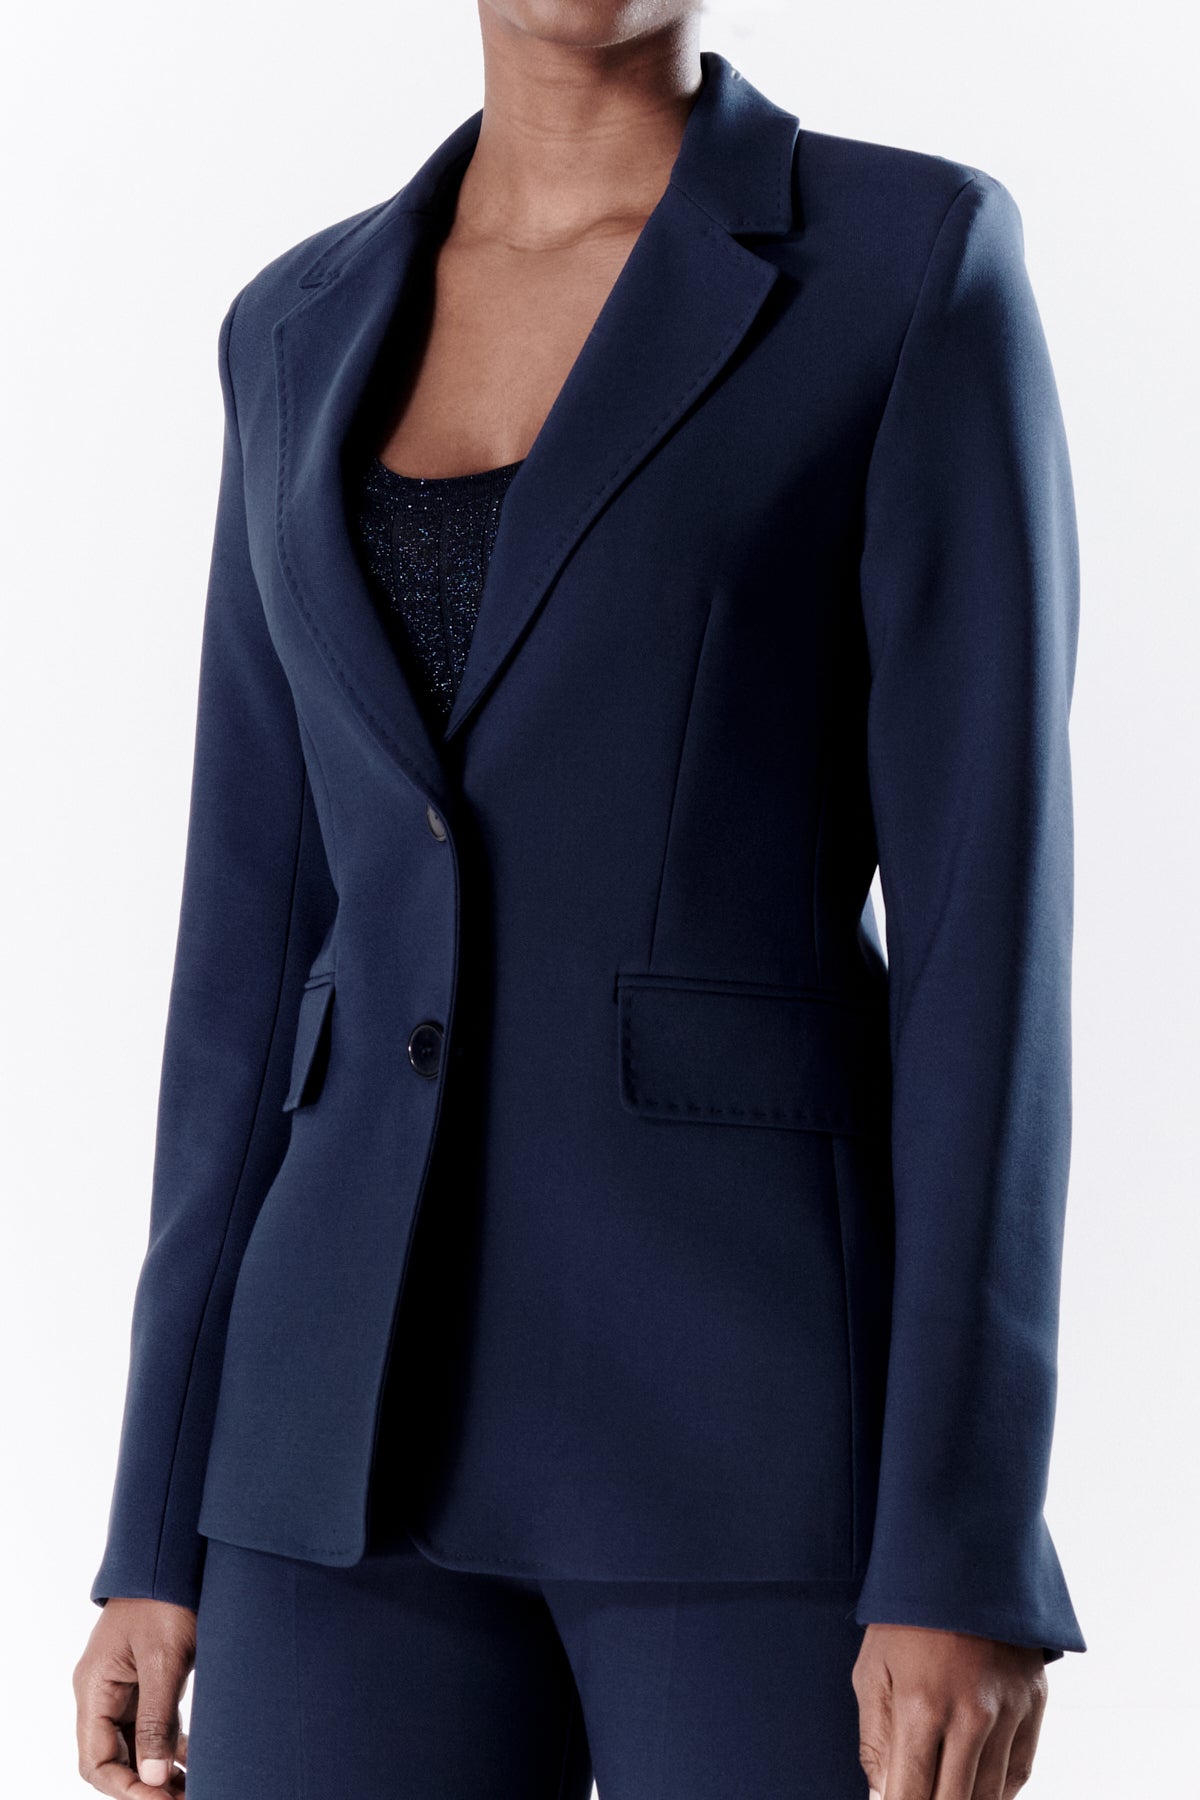 Lily Rose NAVY Suit